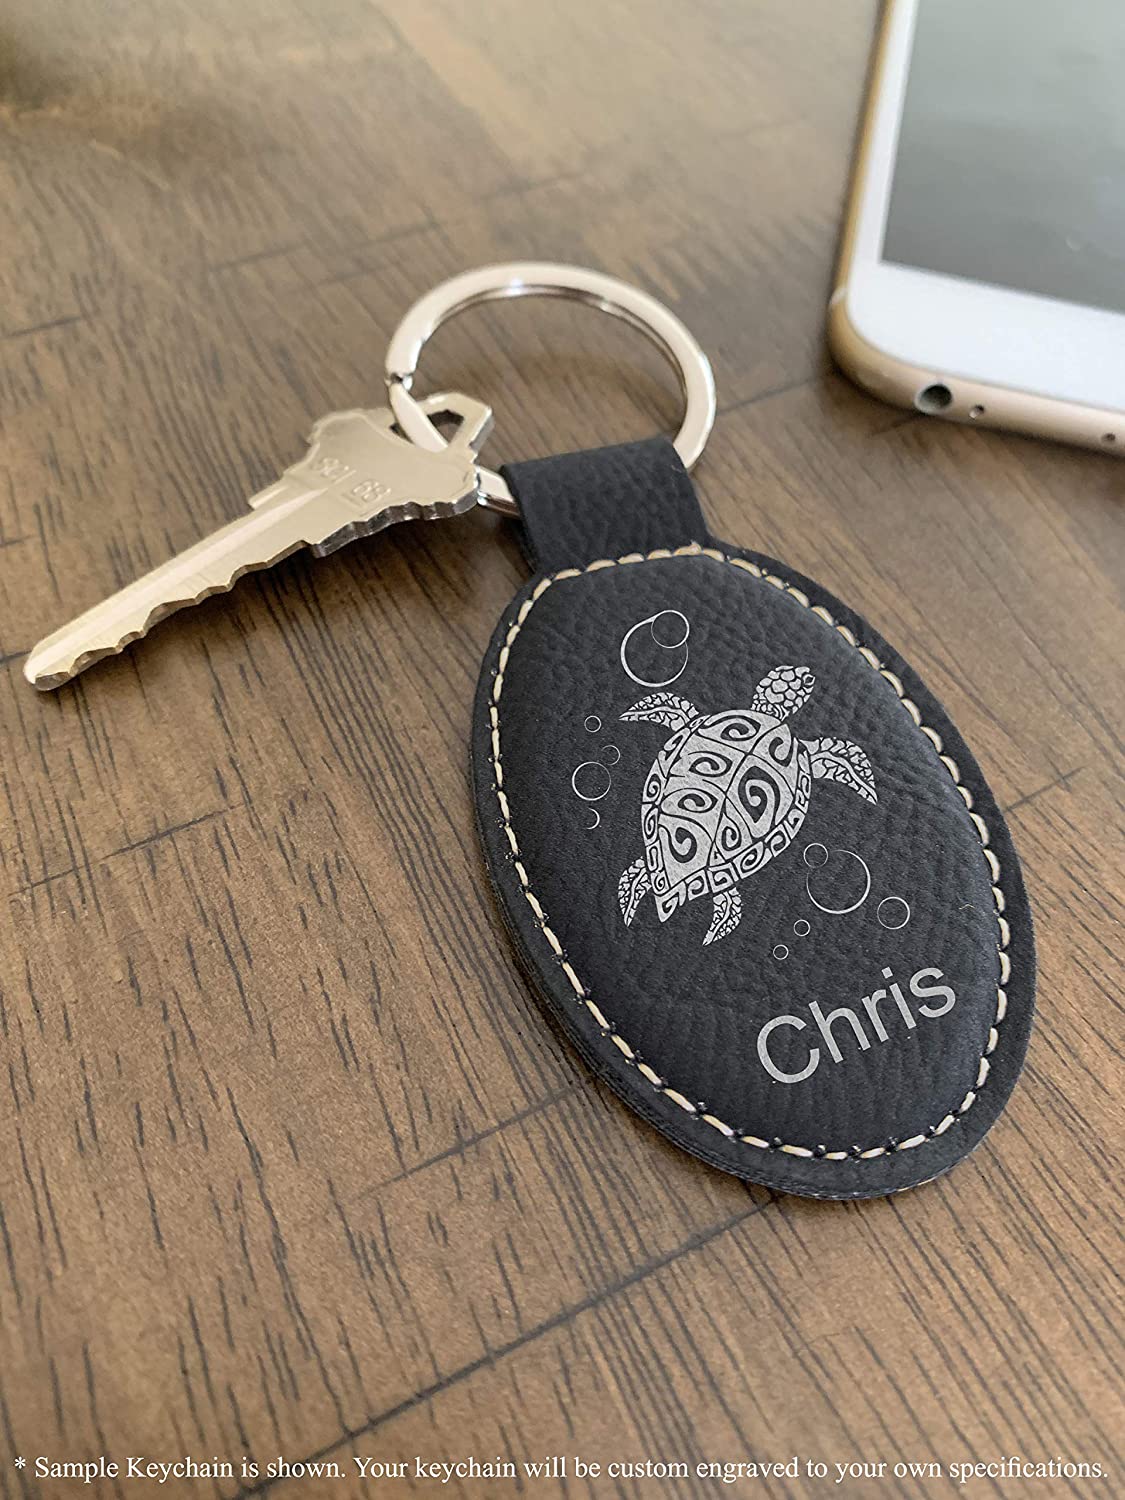 Faux Leather Oval Keychain, DO Doctor of Osteopathic Medicine, Personalized Engraving Included